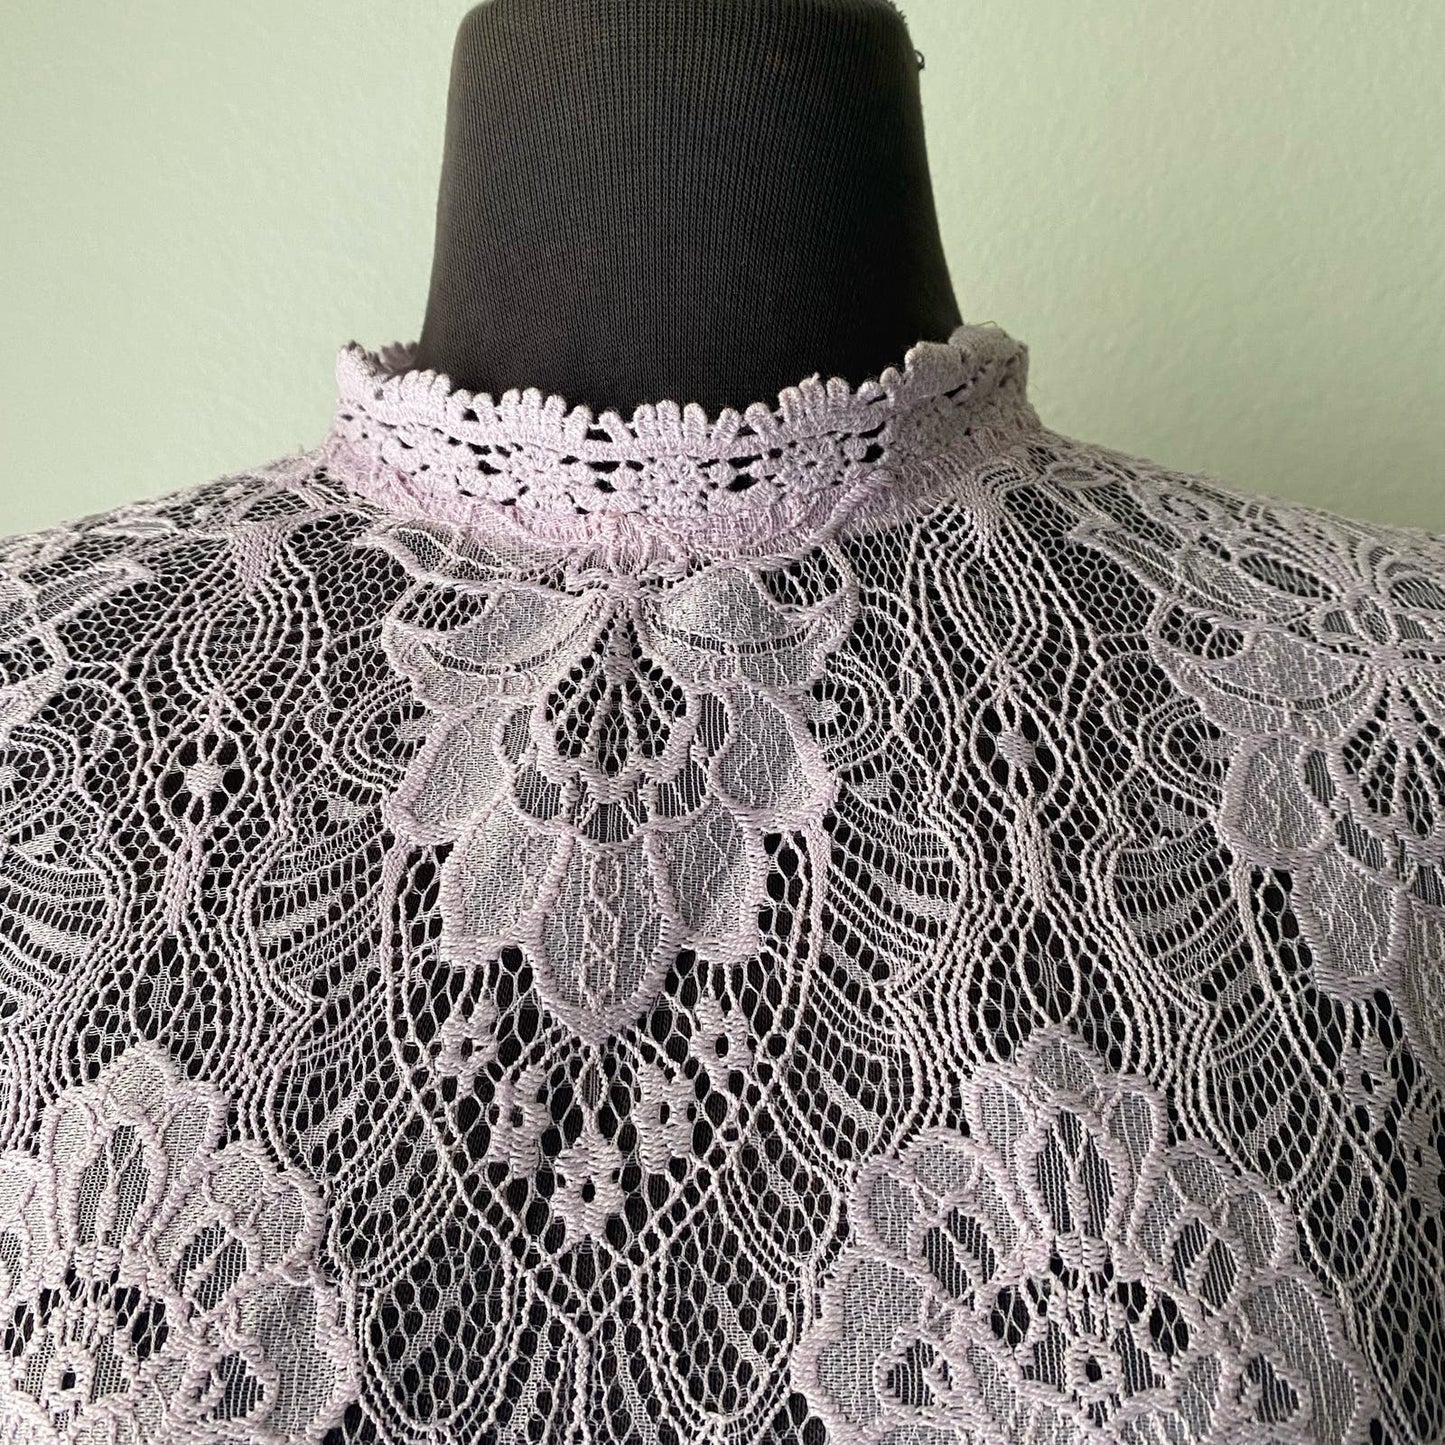 Forever21 sz M lace purple sheer cropped blouse